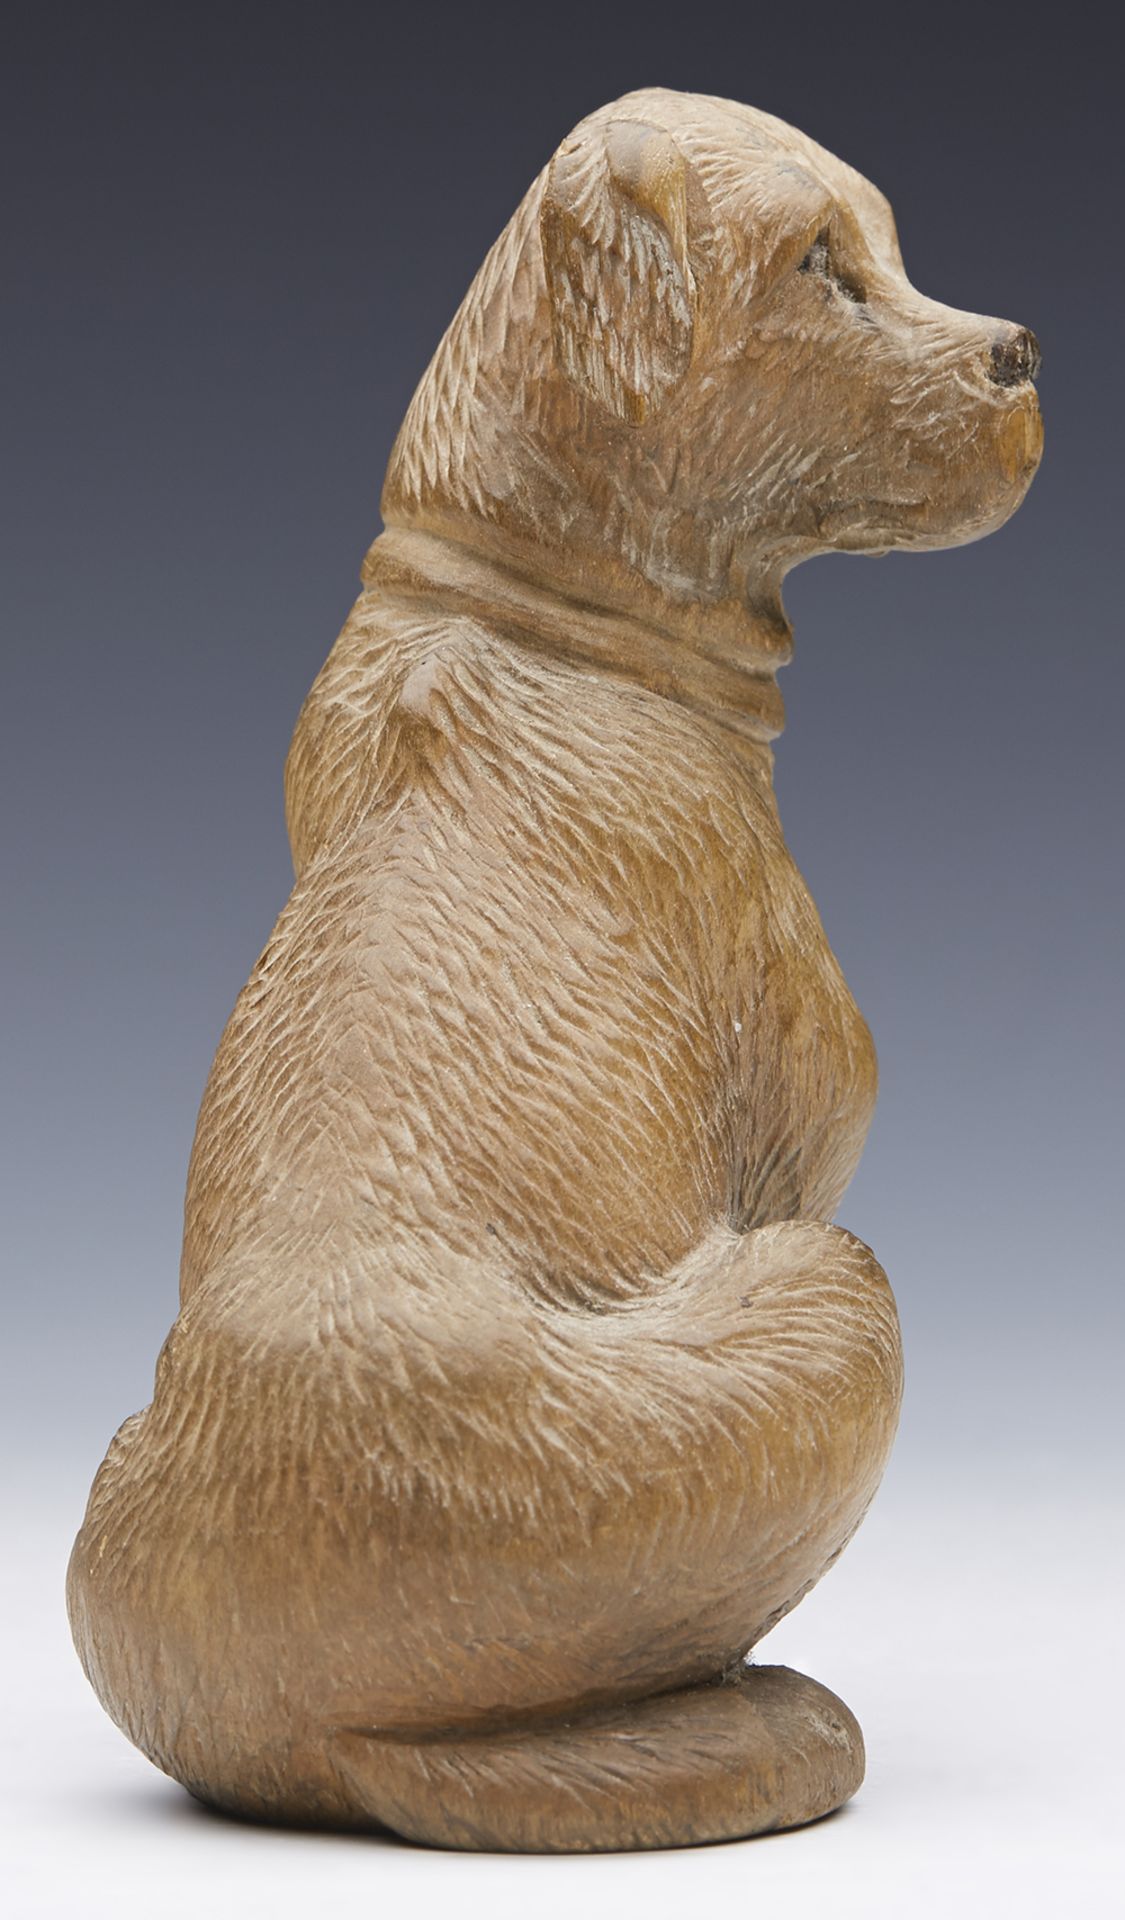 ANTIQUE CARVED BLACKFOREST FIGURE OF A SEATED DOG 19TH C.   DIMENSIONS   Height 10,5cm, Length 7cm - Image 8 of 14